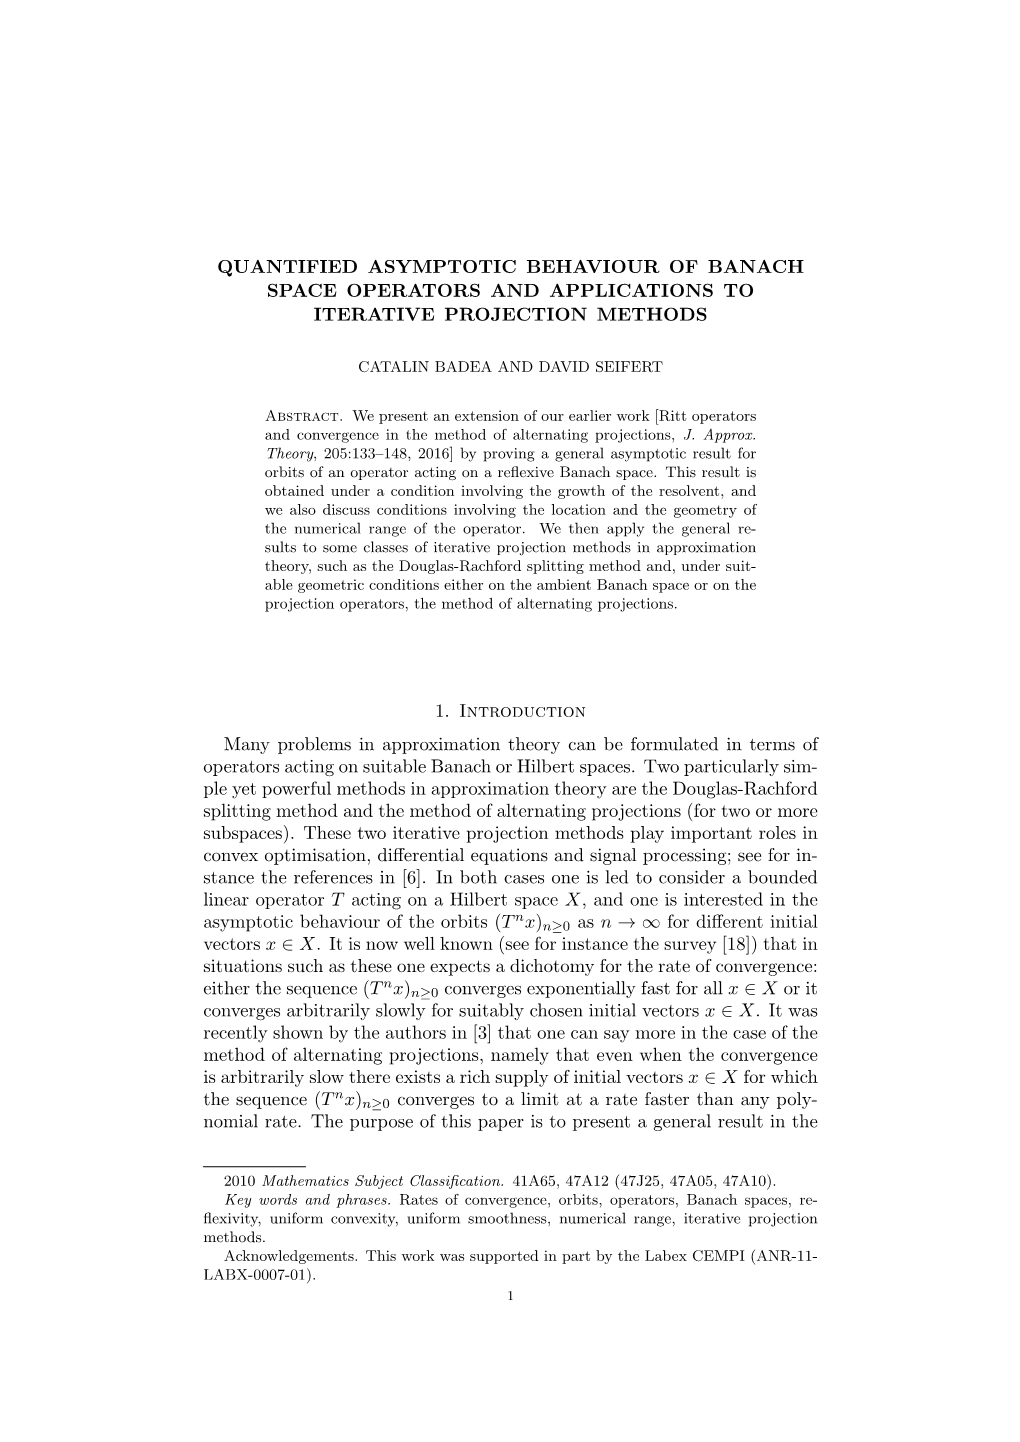 Quantified Asymptotic Behaviour of Banach Space Operators and Applications to Iterative Projection Methods